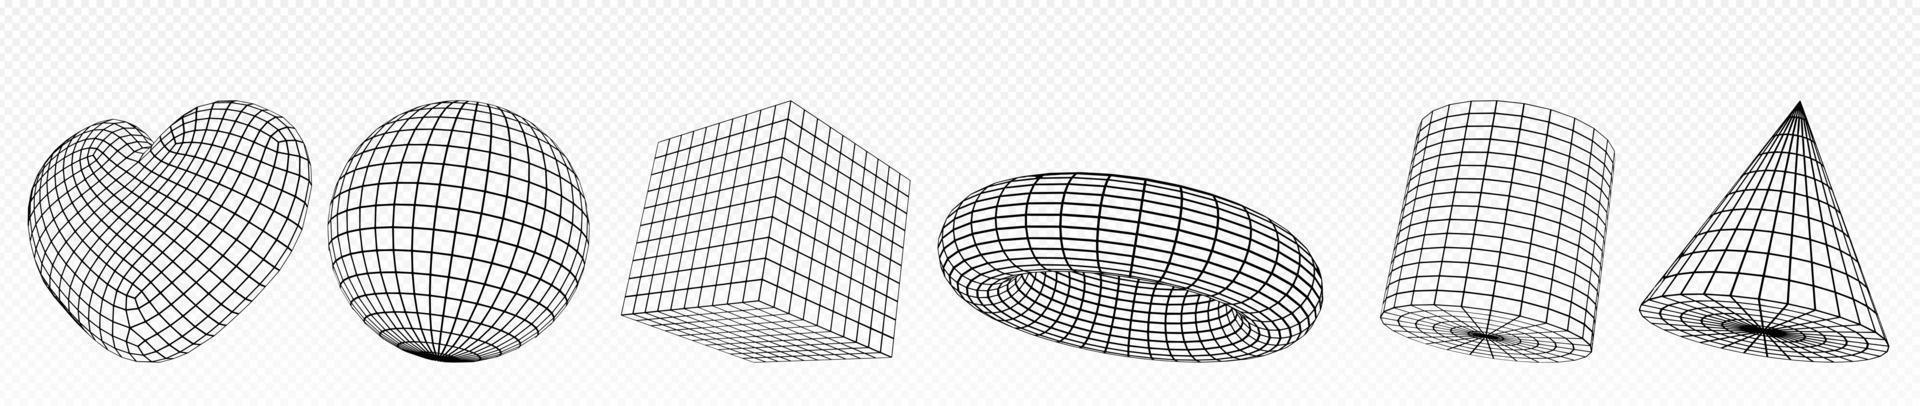 3D set of wireframe geometric figures vector